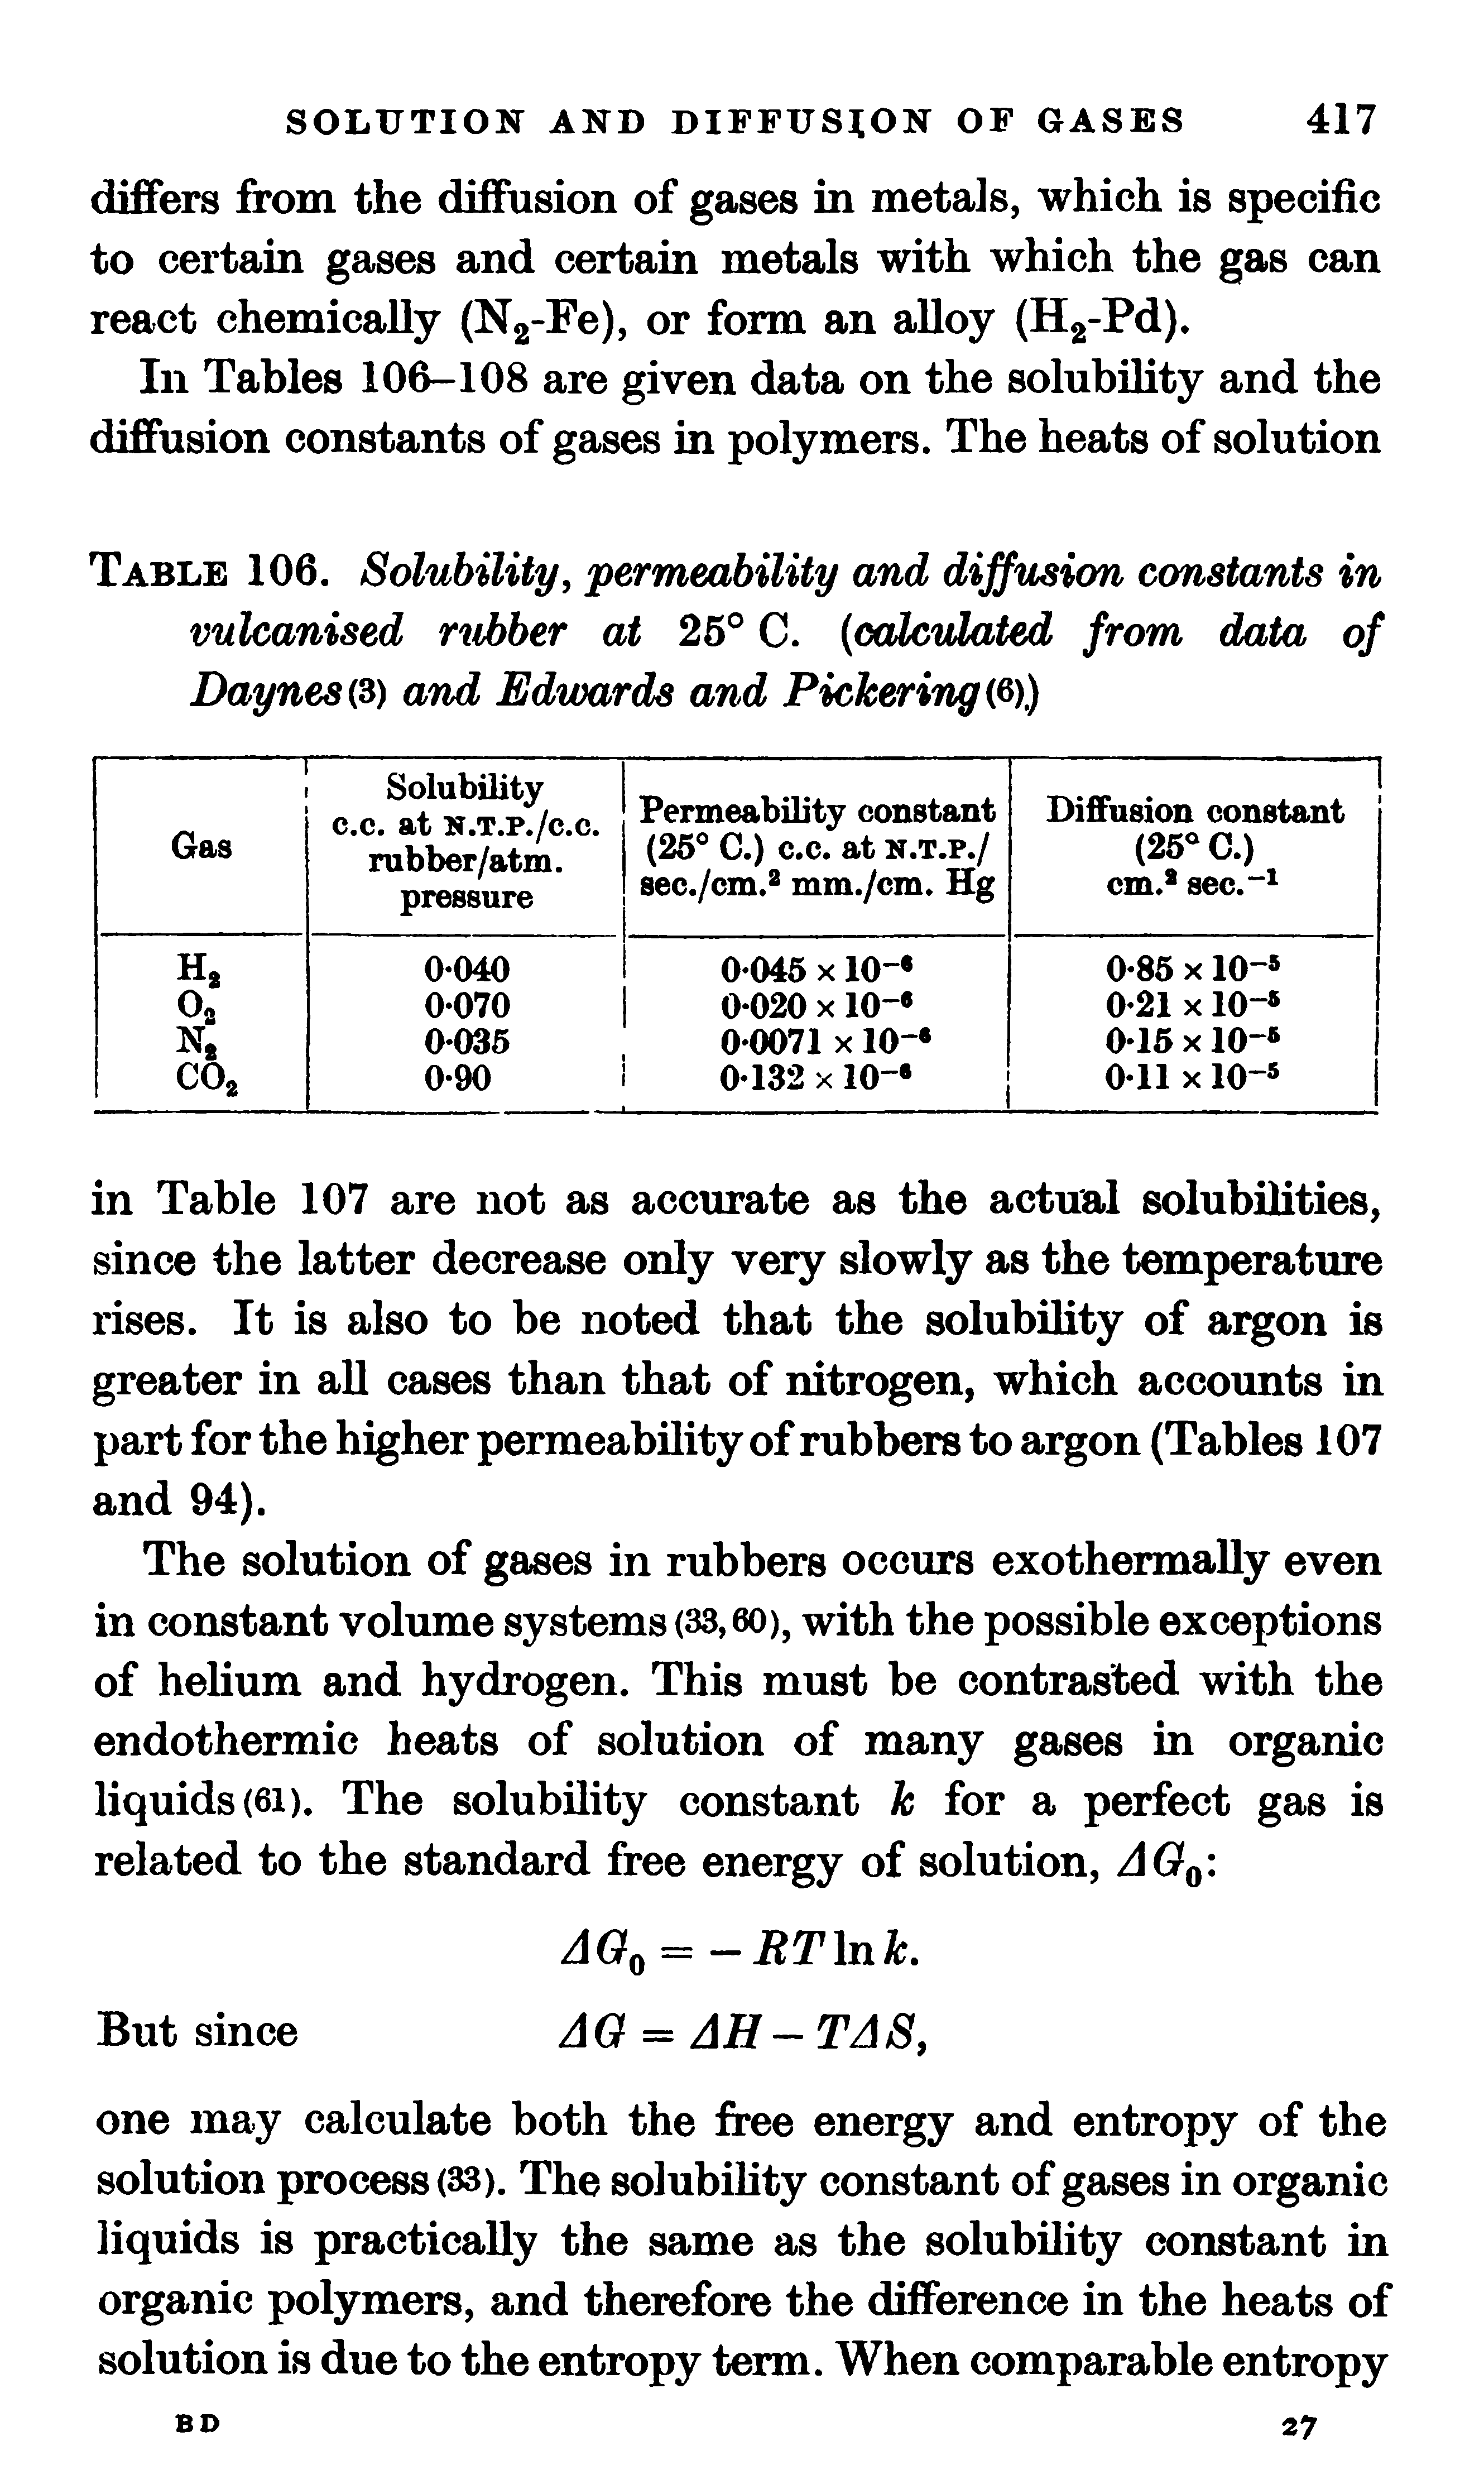 Table 106. Solubility, permeability and diffusion constants in vulcanised r ubber at 25° C. (calculated from data of DaynesiS) and Edwards and Pickering C))...